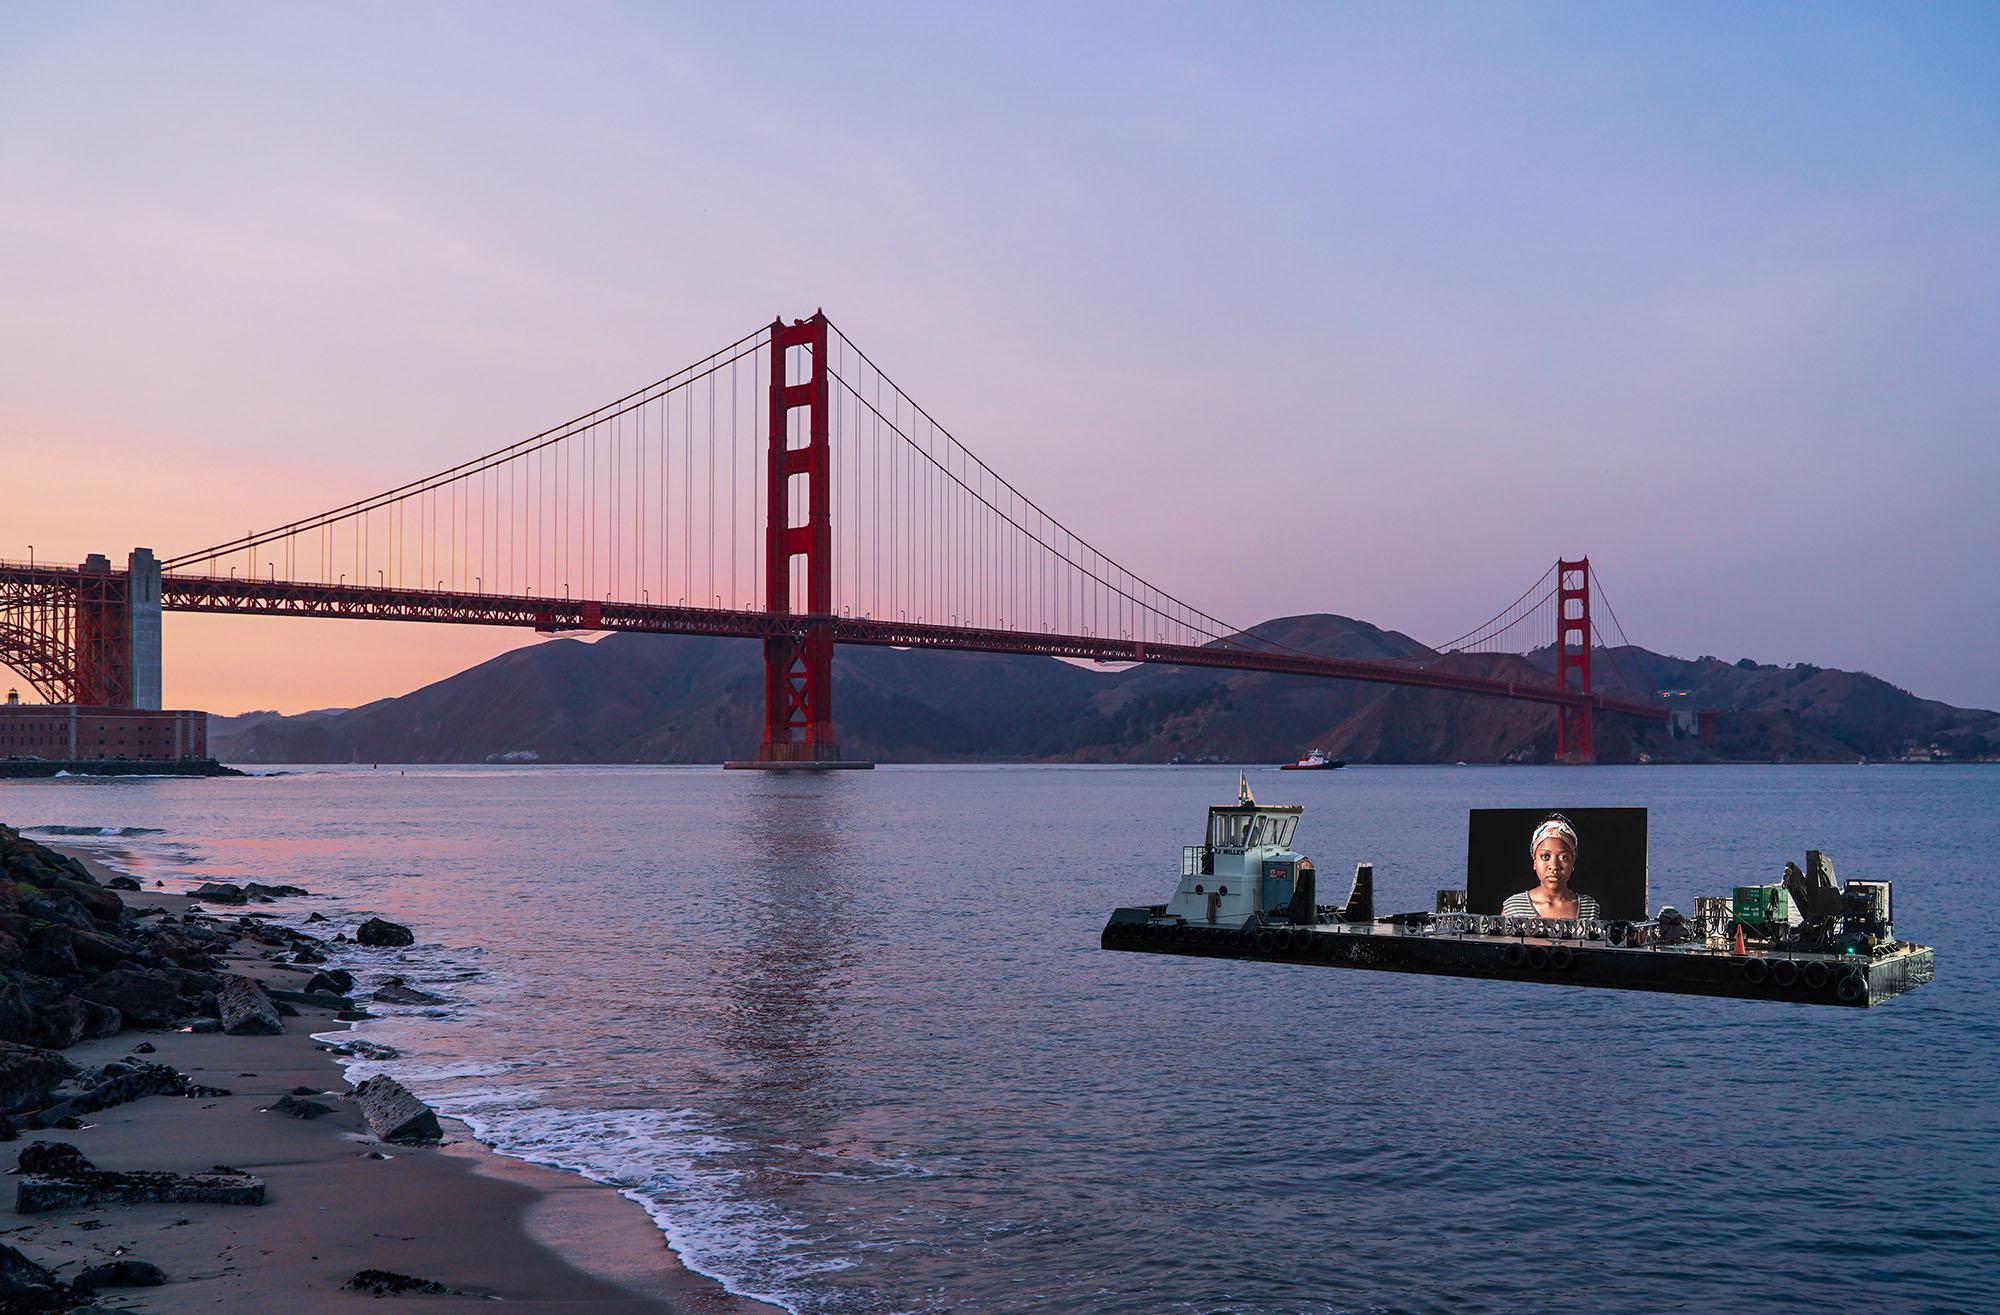 Night Watch: A new kind of film festival is coming to San Francisco Bay